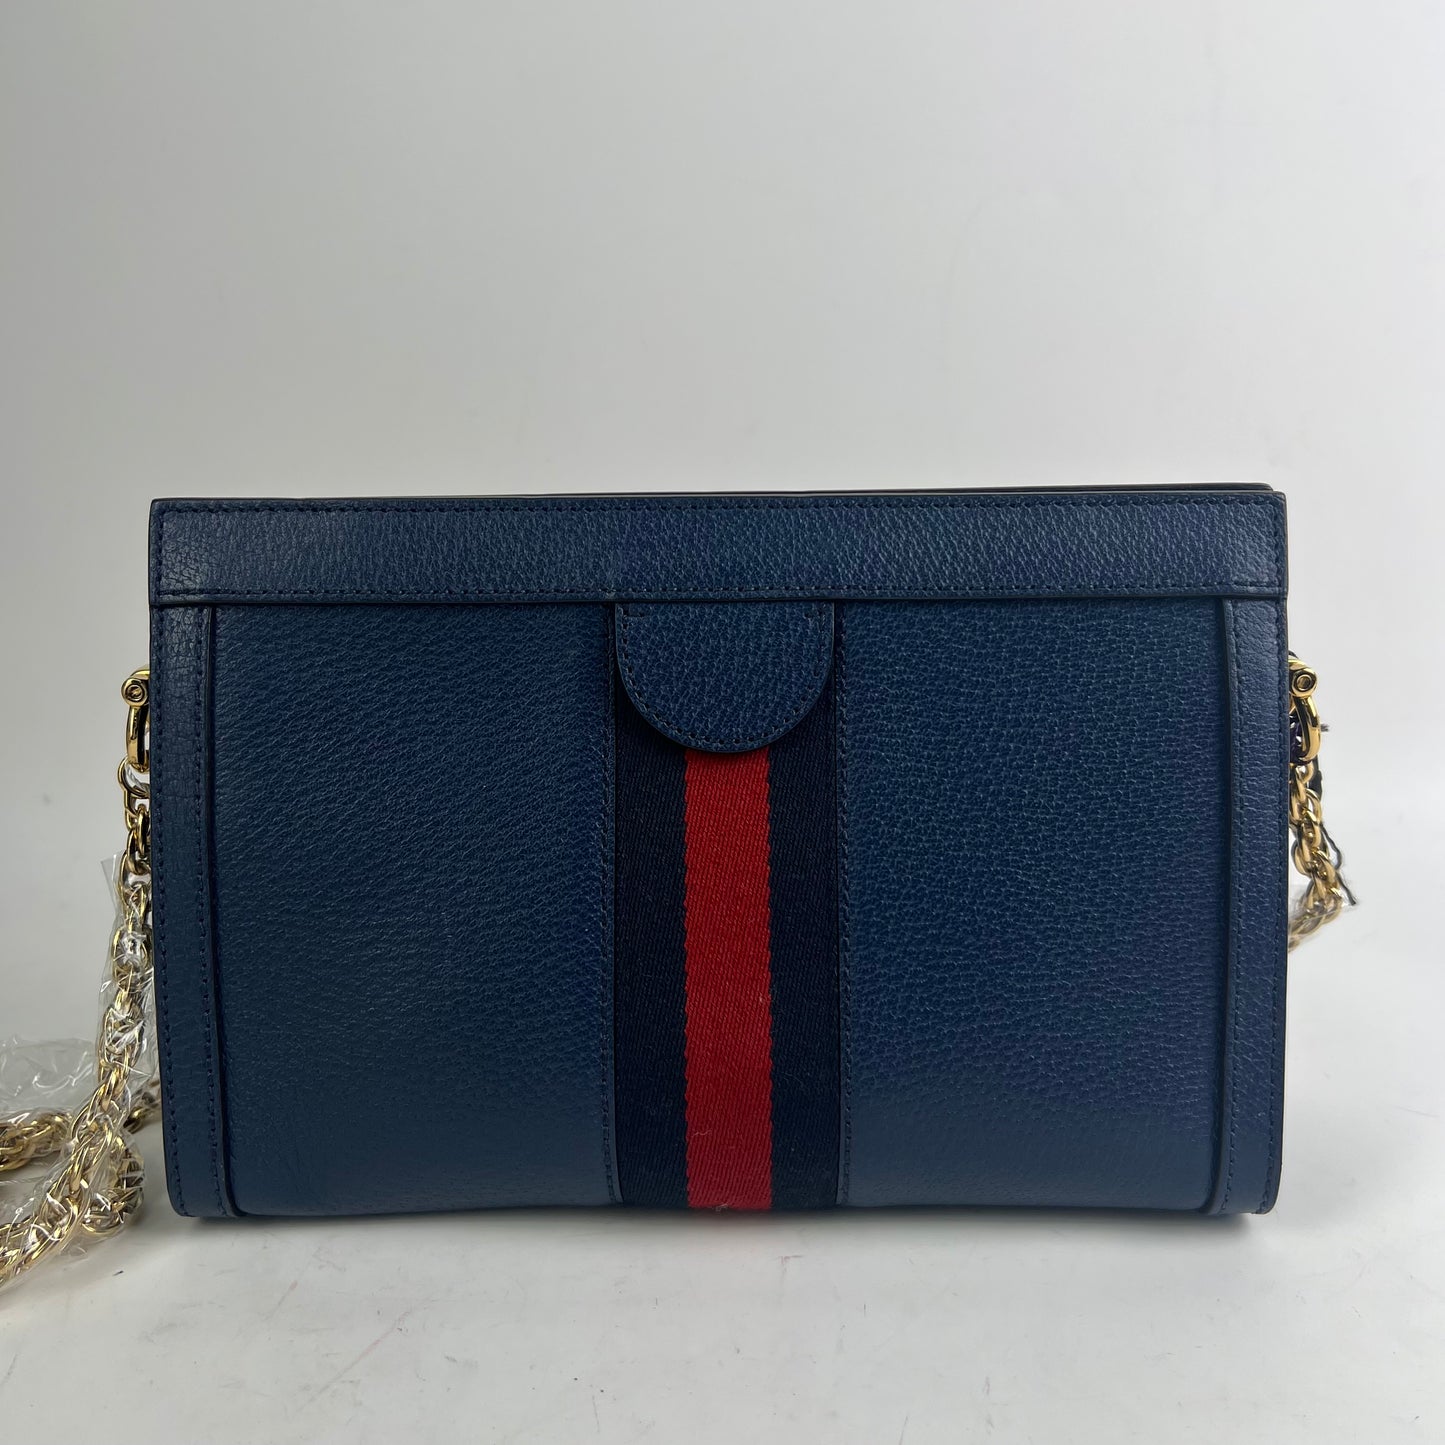 【Company Deal】Pre-owned Gucci Blue Ophidia Calfskin Crossbody Bag-HZ